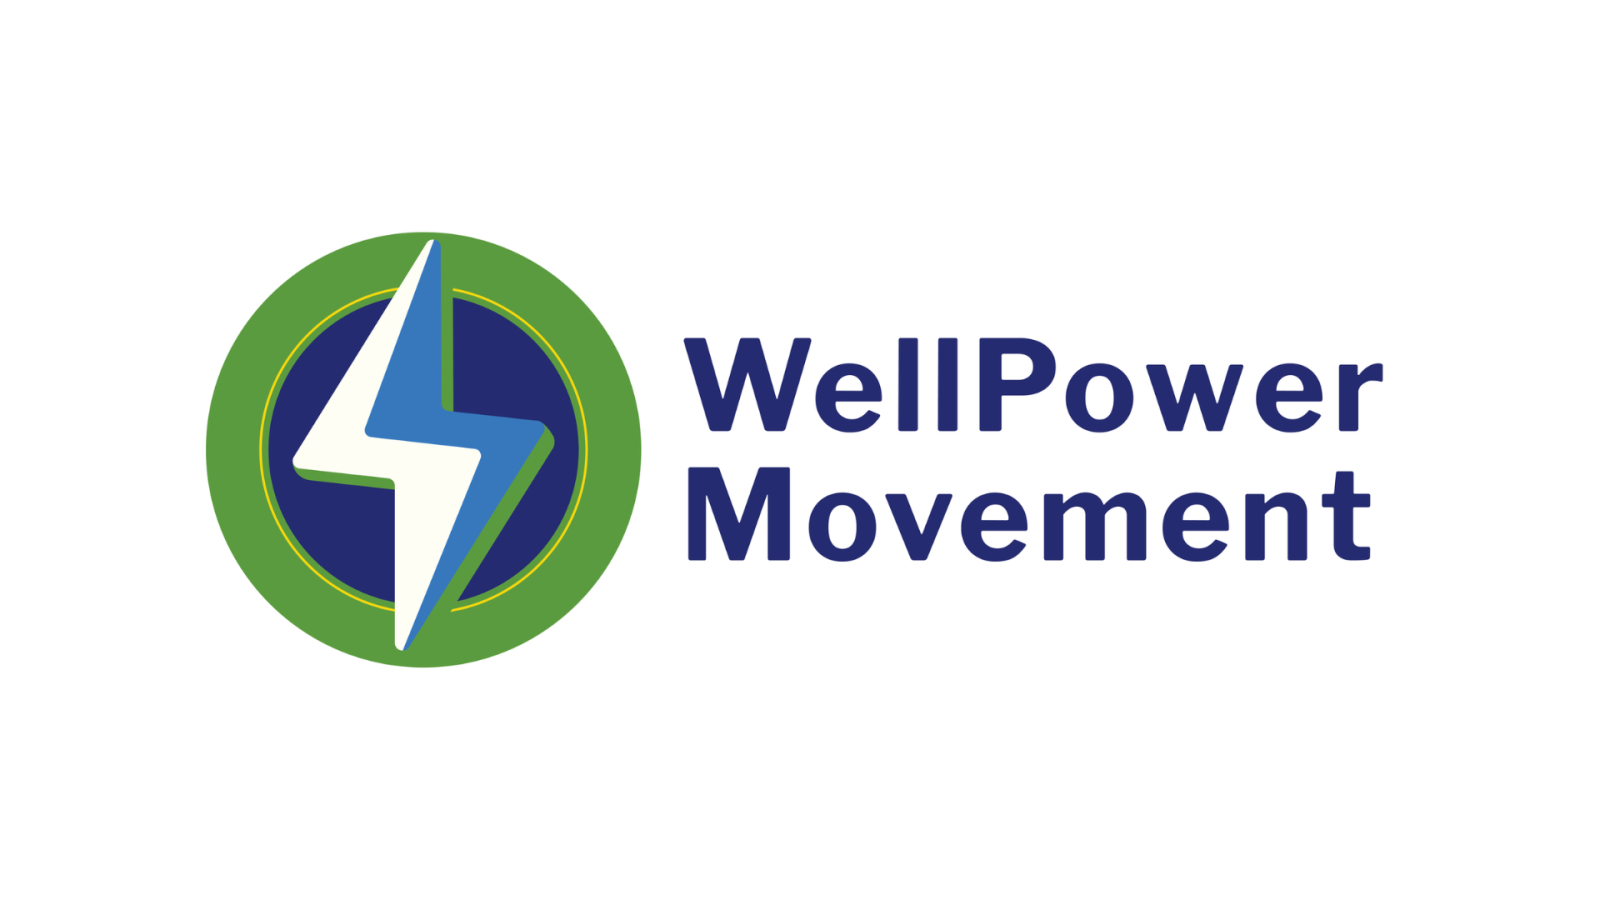 Lightening Bolt inside of a green and blue circle with the Text "WellPower Movement" to the right of the circle.